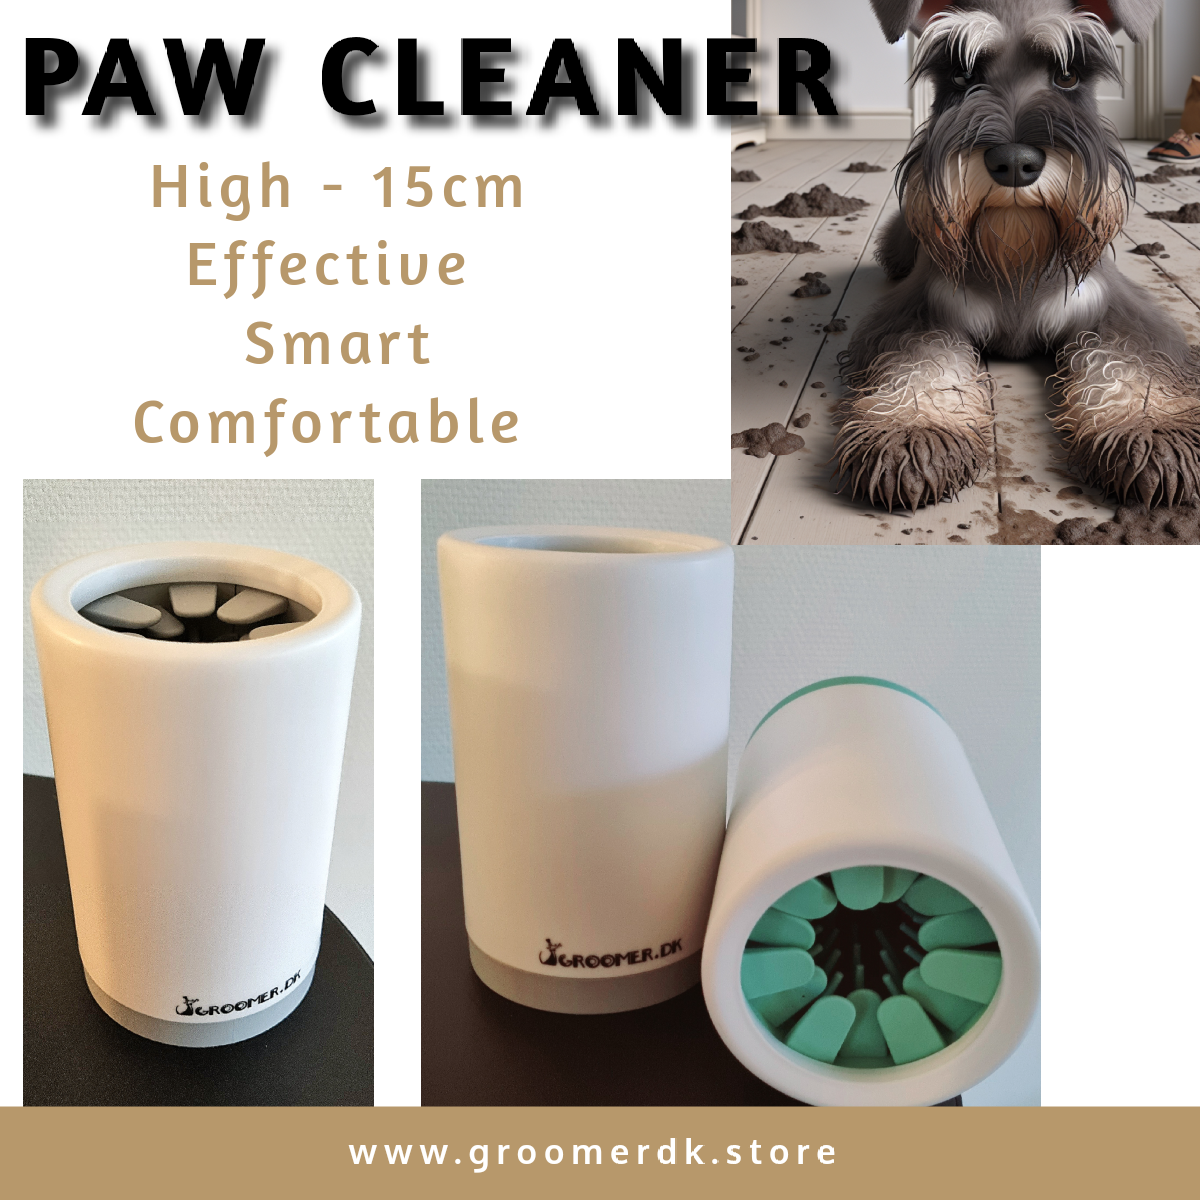 Paw cleaner cup 15x10cm